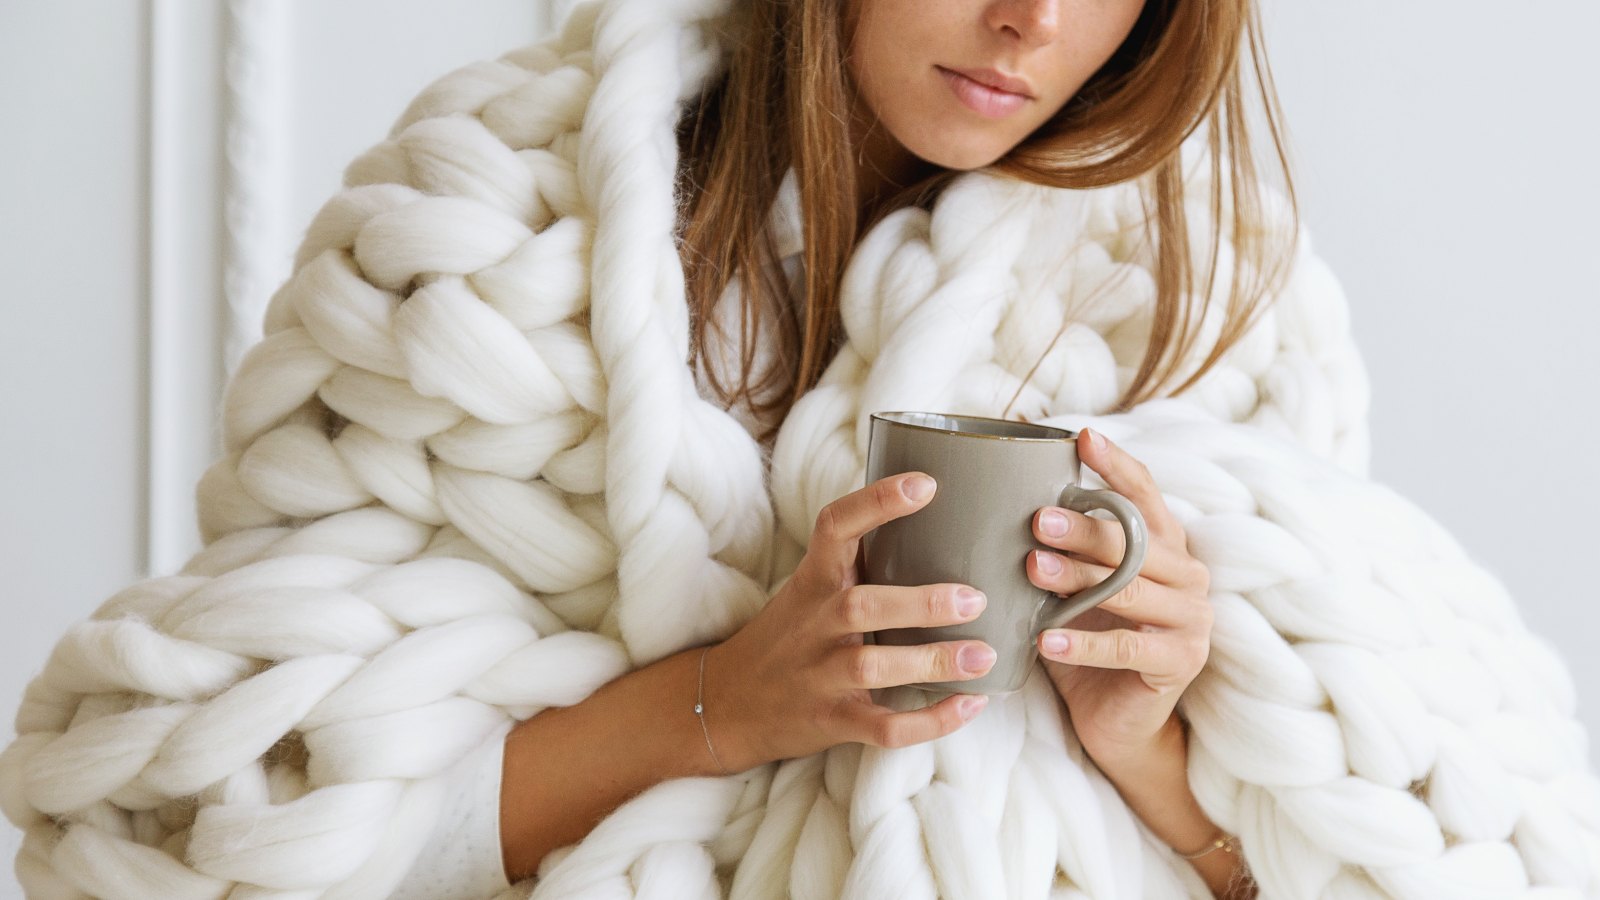 11 Chunky Knit Blankets to Keep You Cozy in Cuffing Season